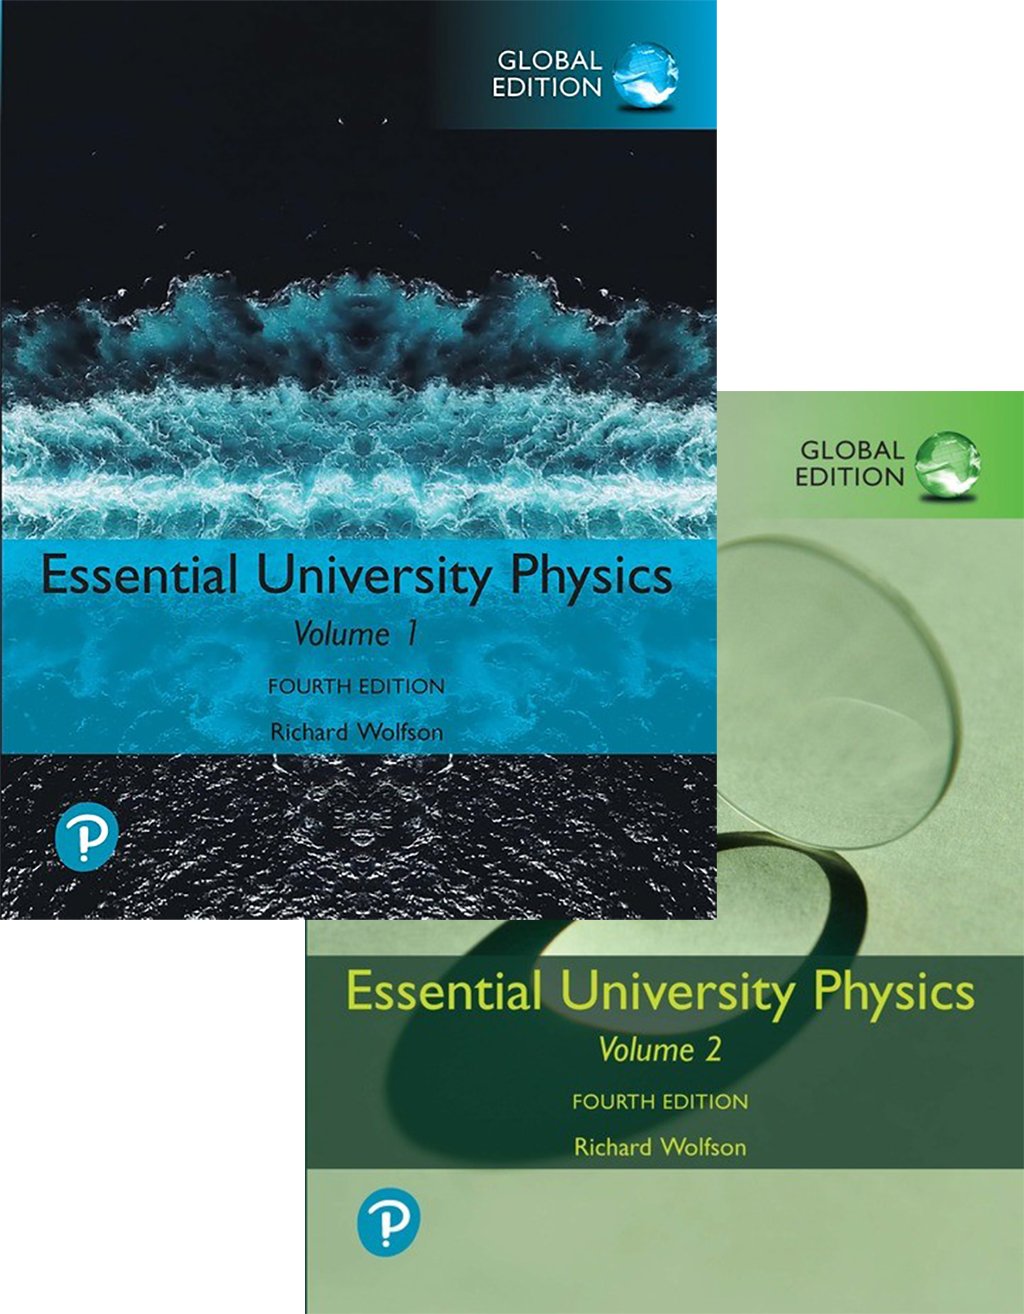 Essential University Physics: Volume 1 & 2 pack, Global Edition, 4th Edition